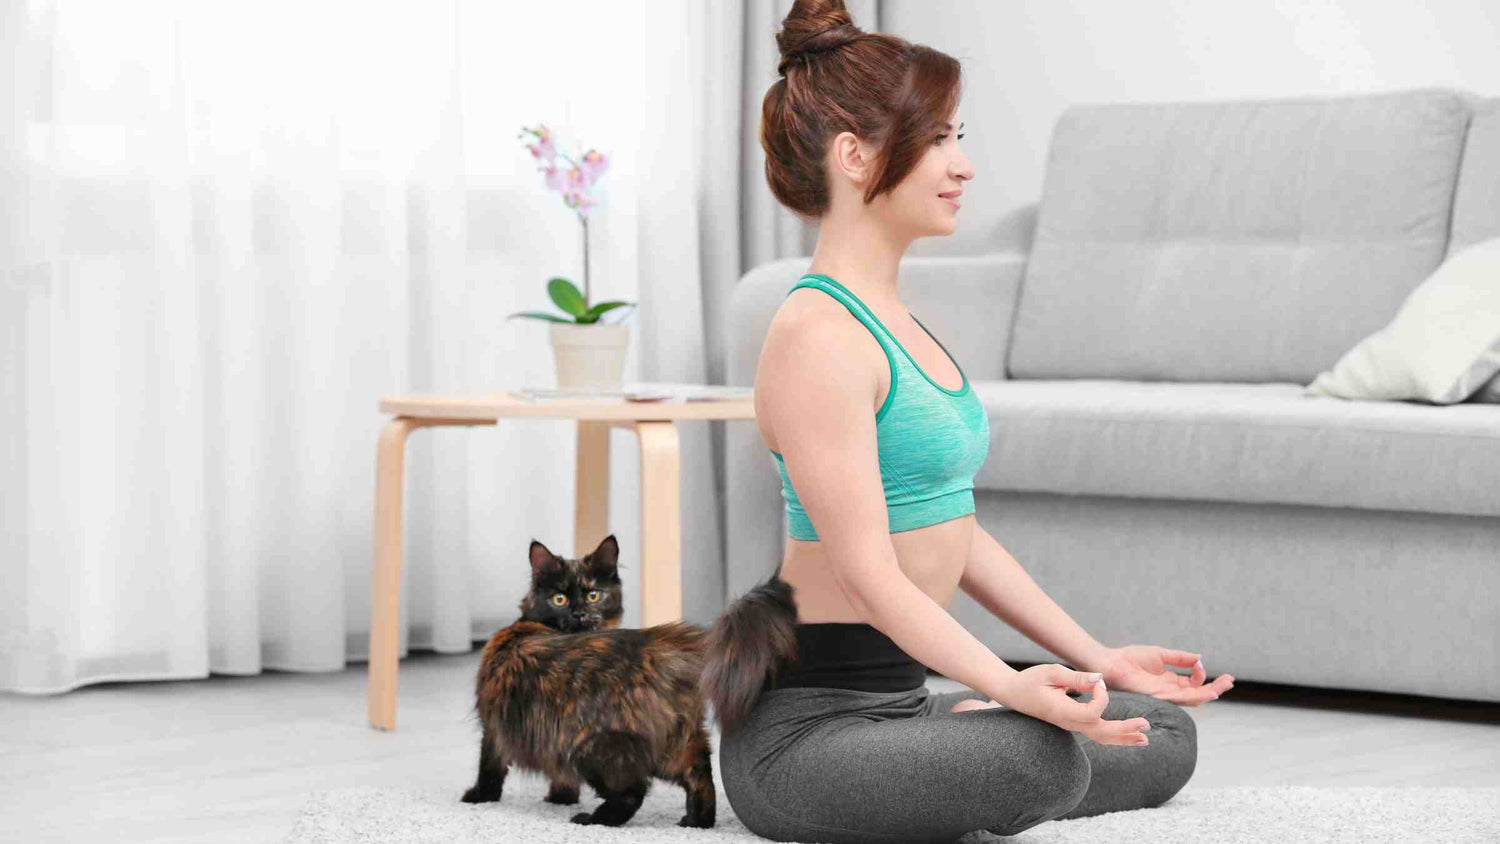 Woman embracing a holistic lifestyle for cats by meditating in a yoga pose with her attentive feline companion at home.